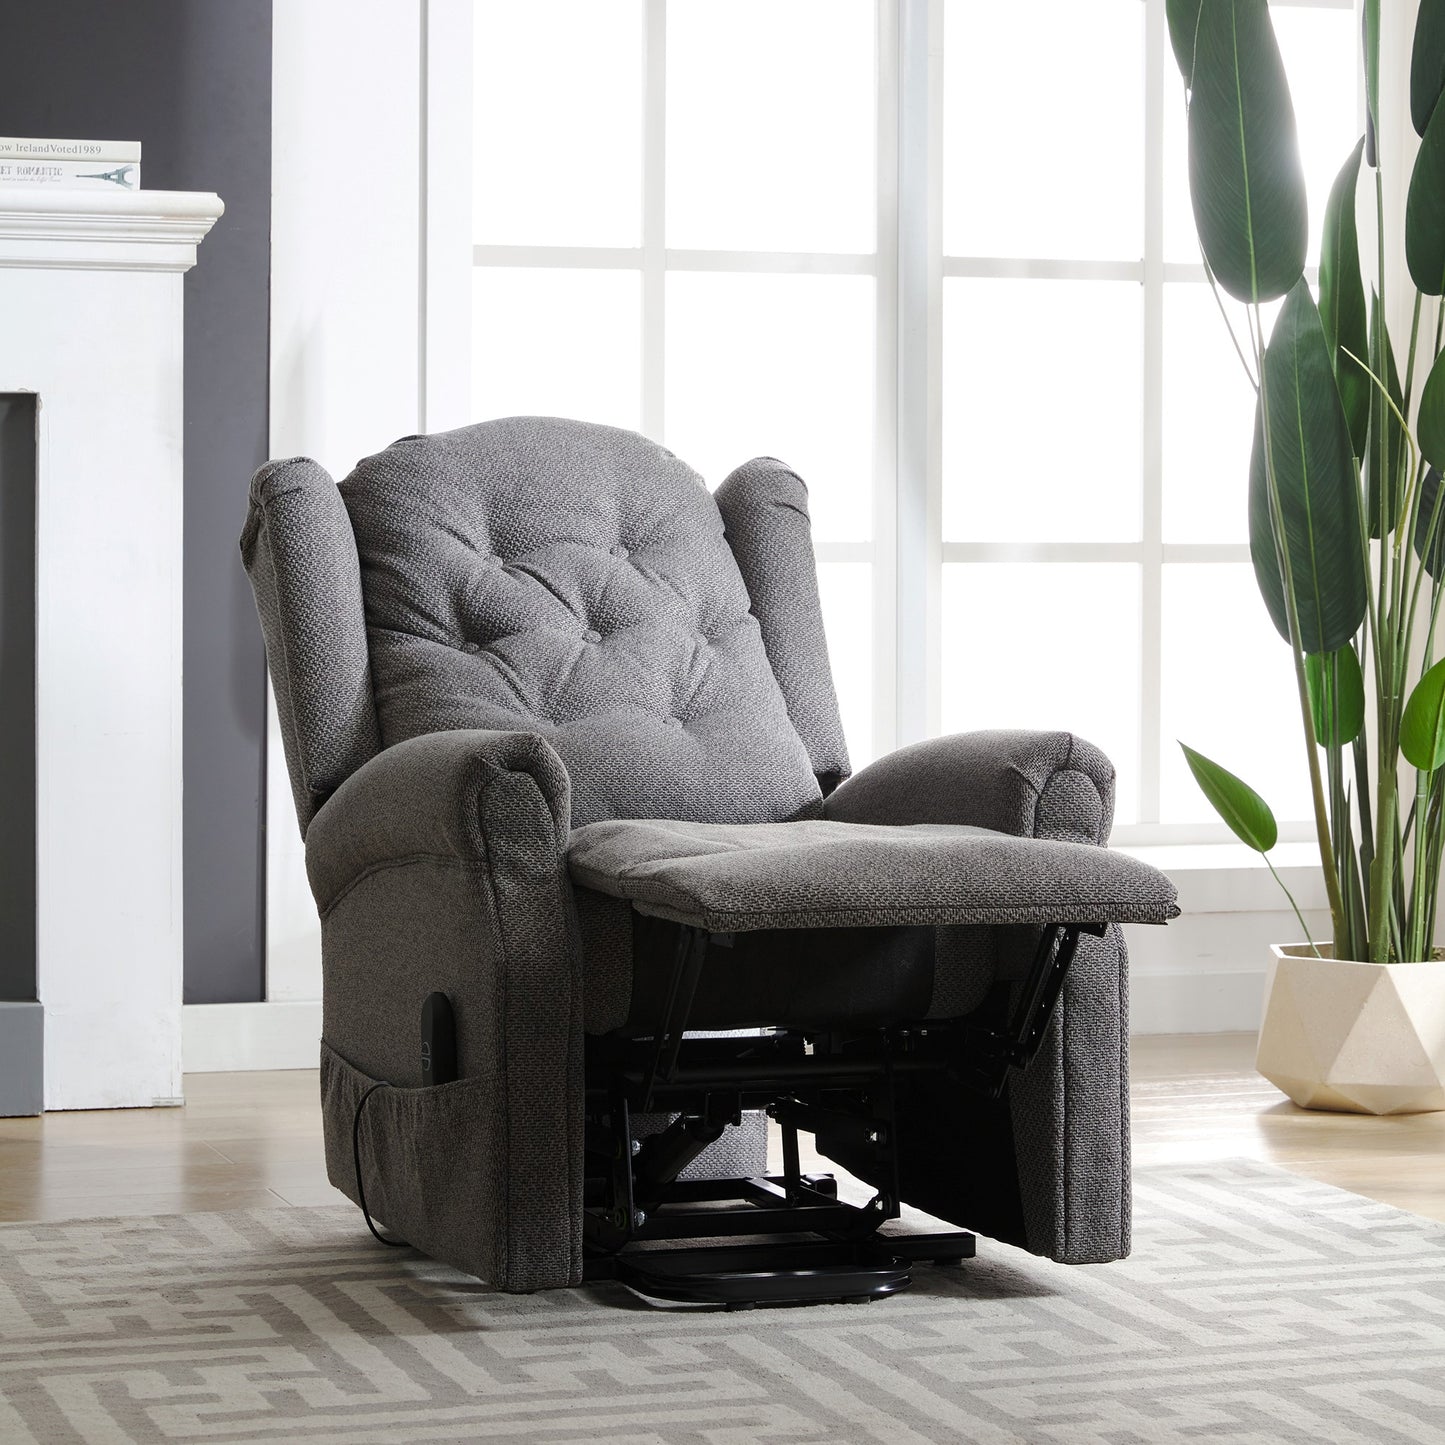 Gosford electric riser recliner with massage and heat